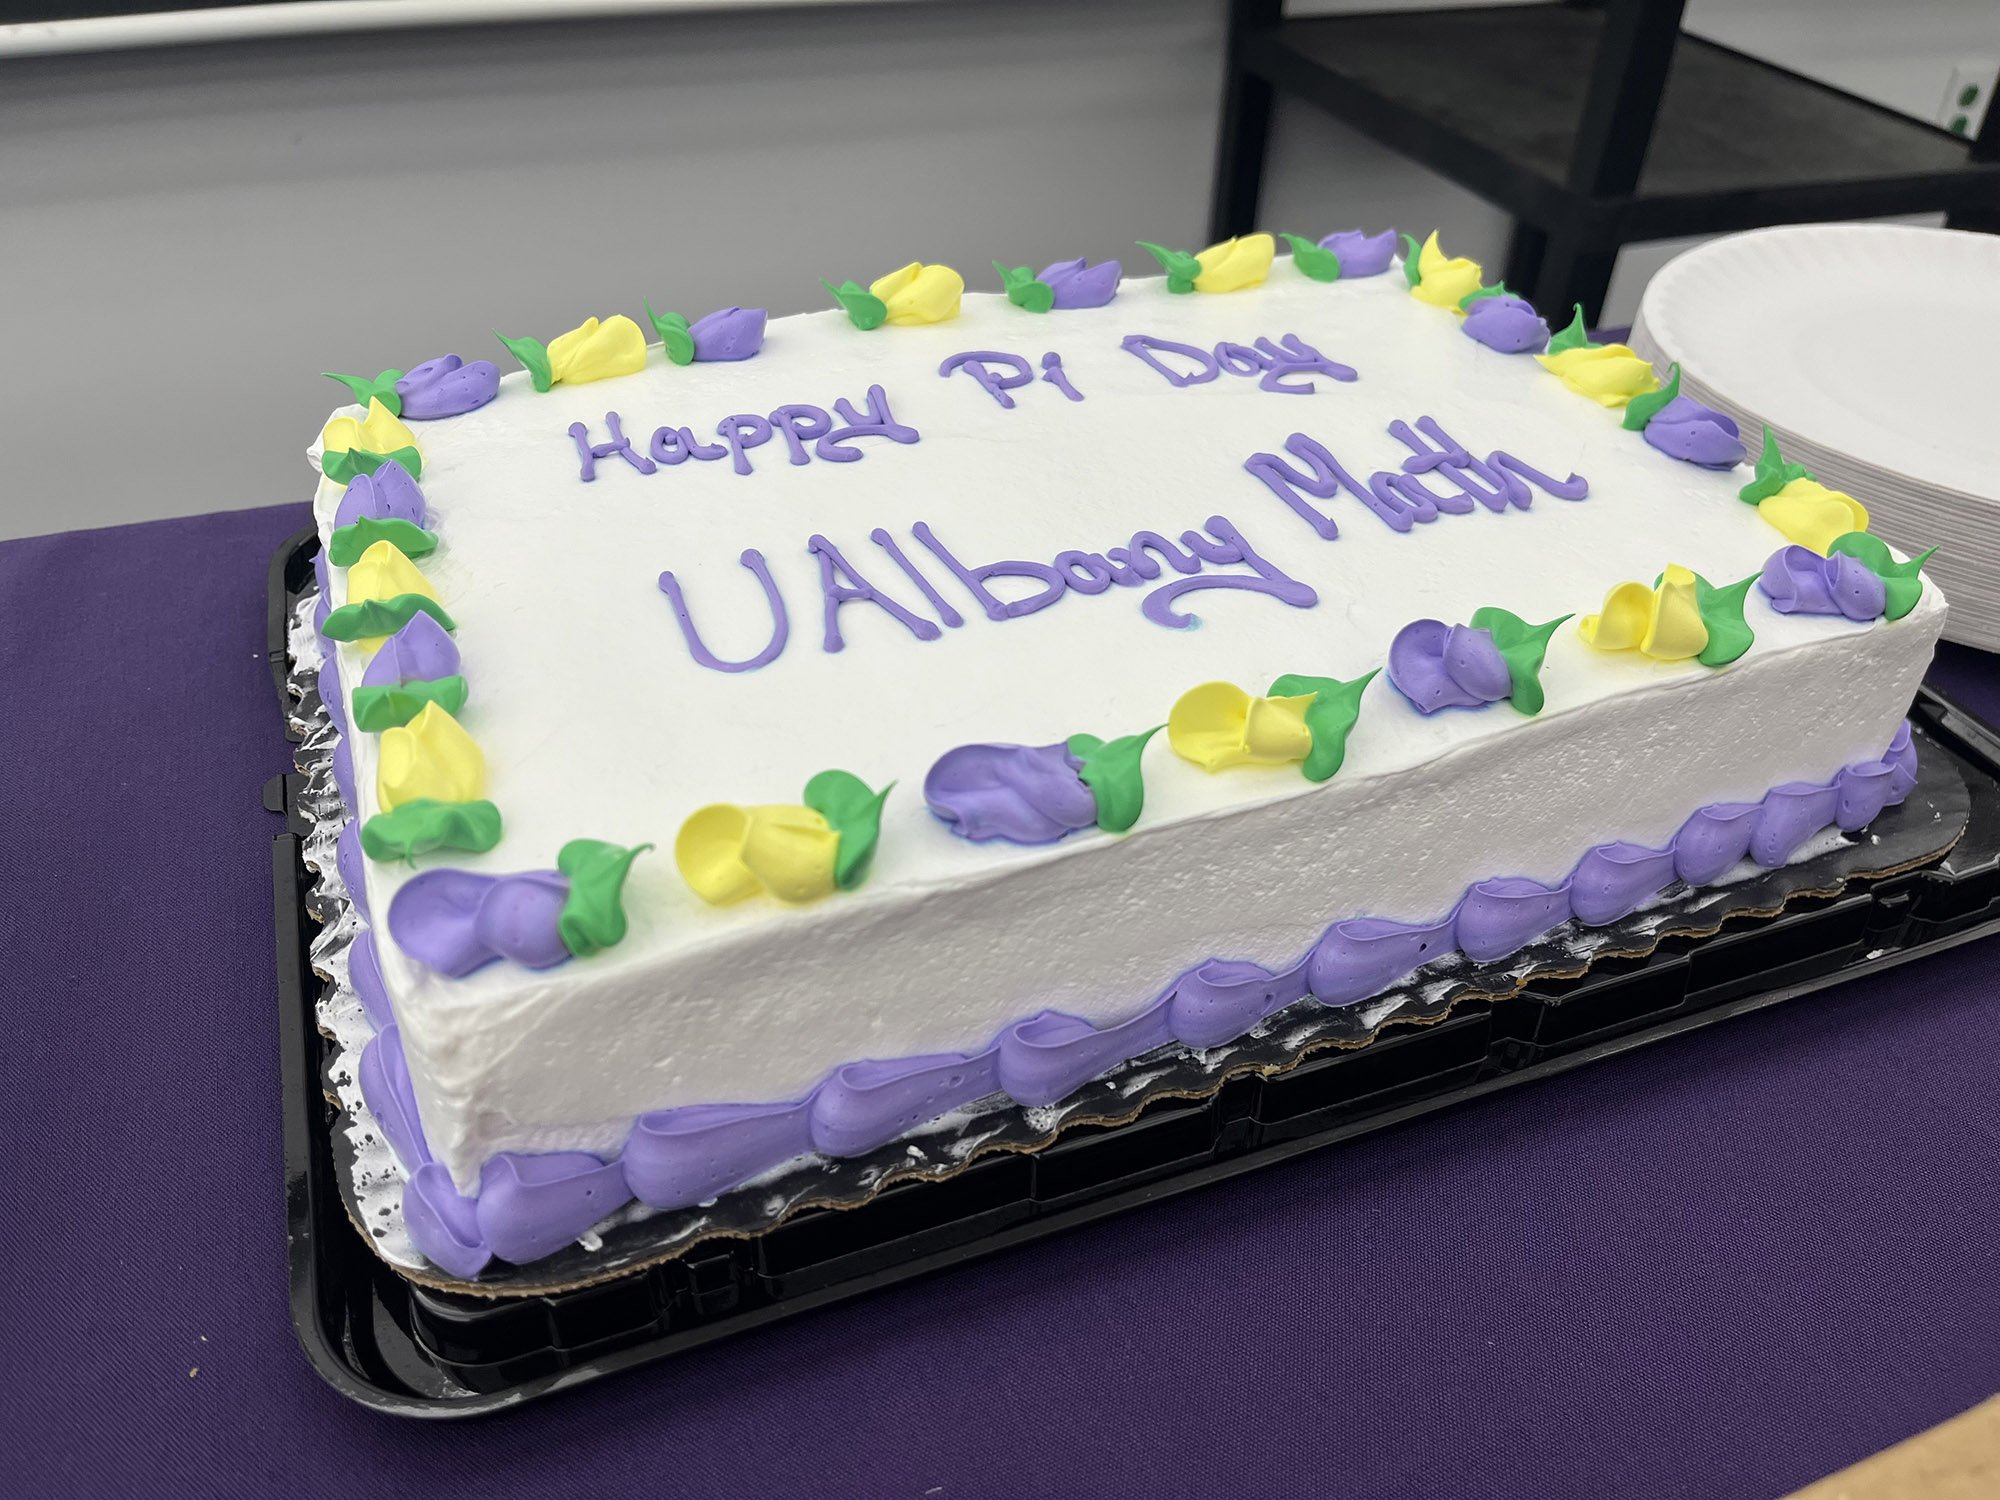 A cake with purple and yellow flowers and purple lettering reads "Happy Pi Day UAlbany Math". 